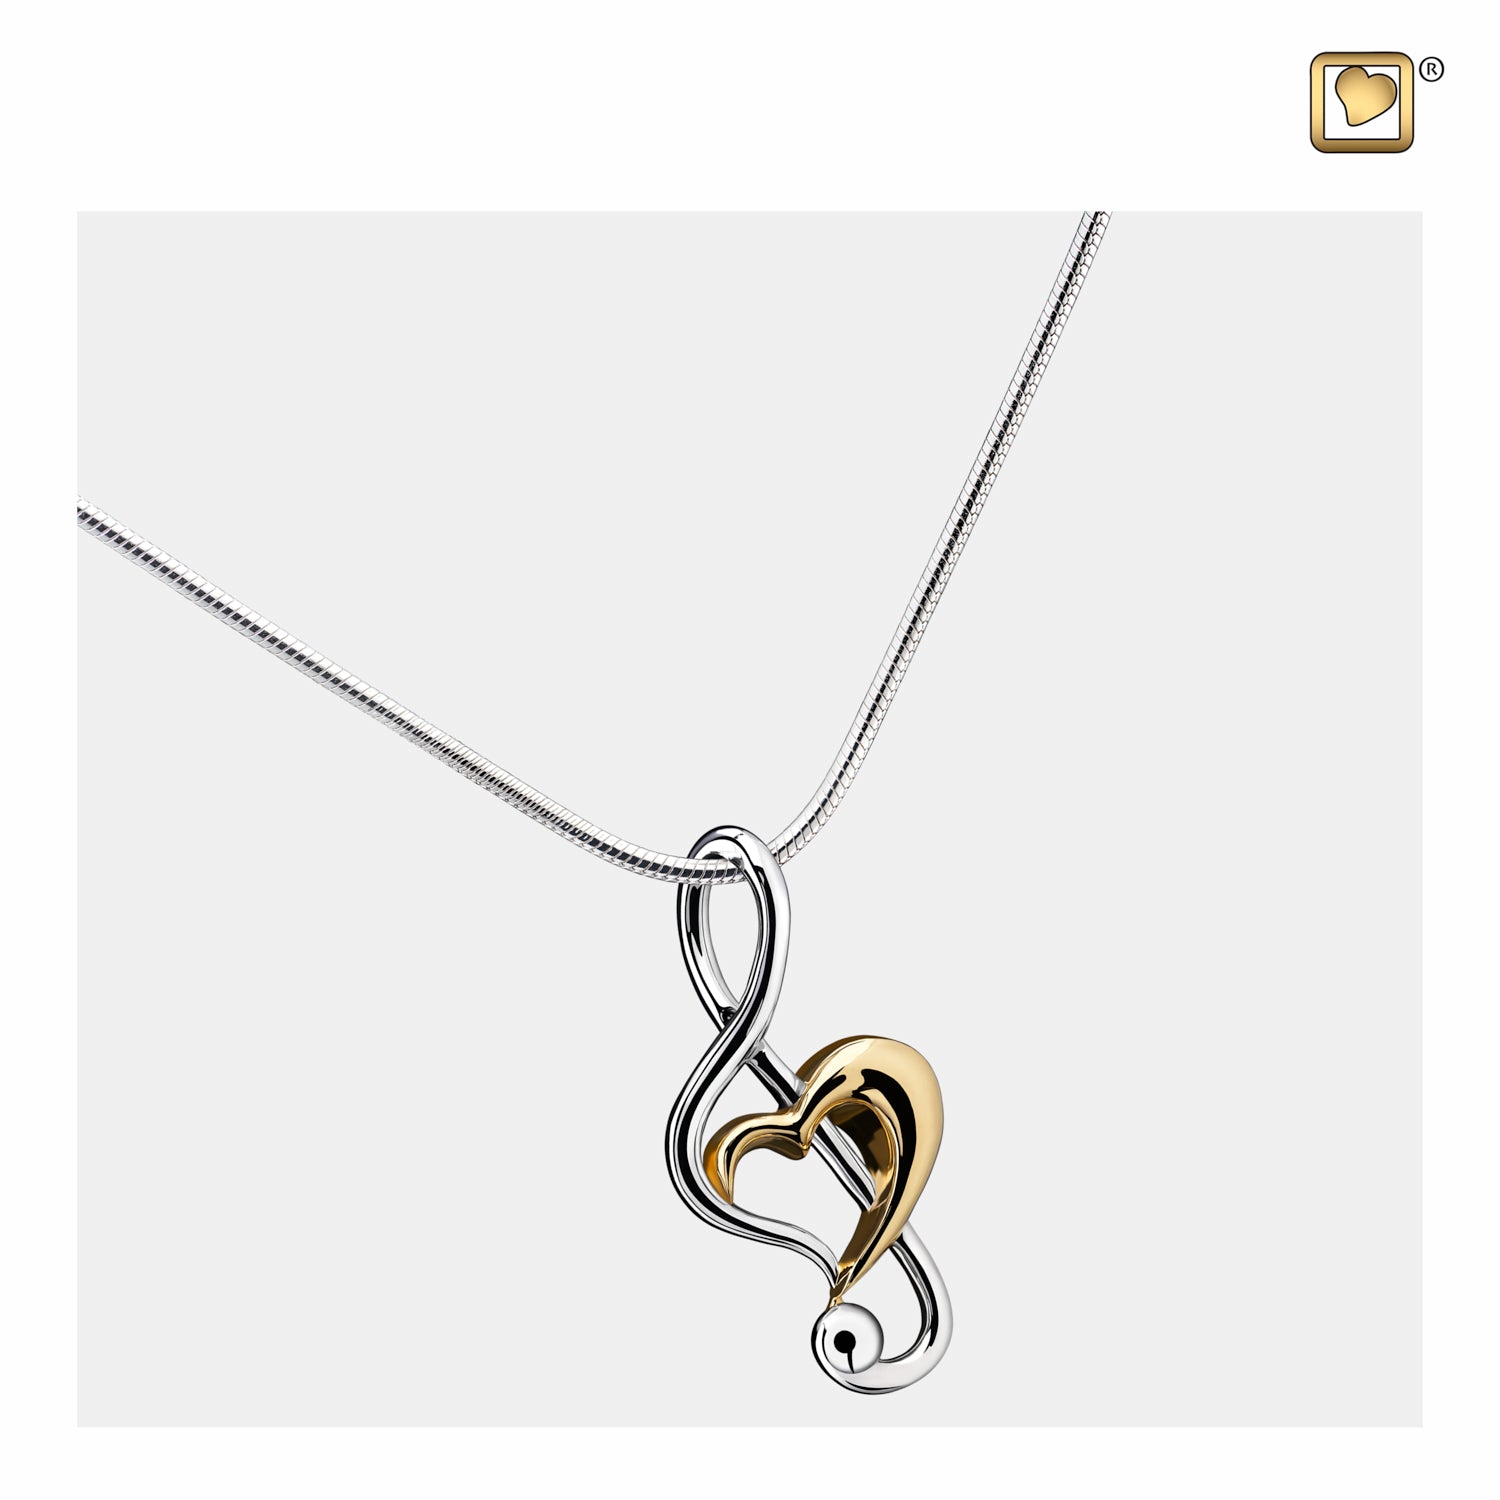 Detail Clef Heart Necklace Nomer 49